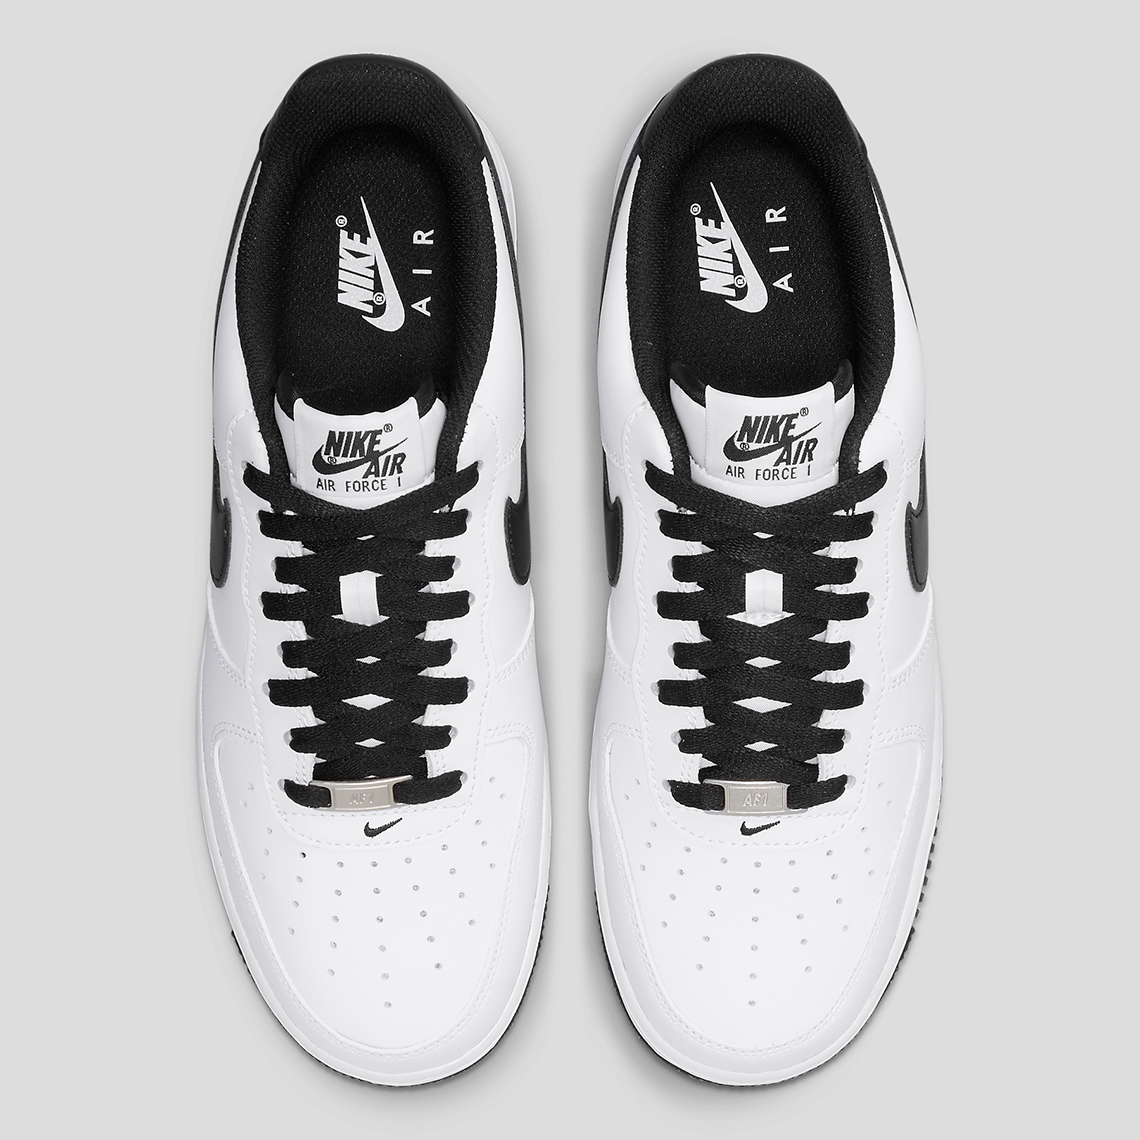 Nike Air Force 1 '07 White Black On Feet Sneaker Review QuickSchopes 275  Schopes DH7561 102 